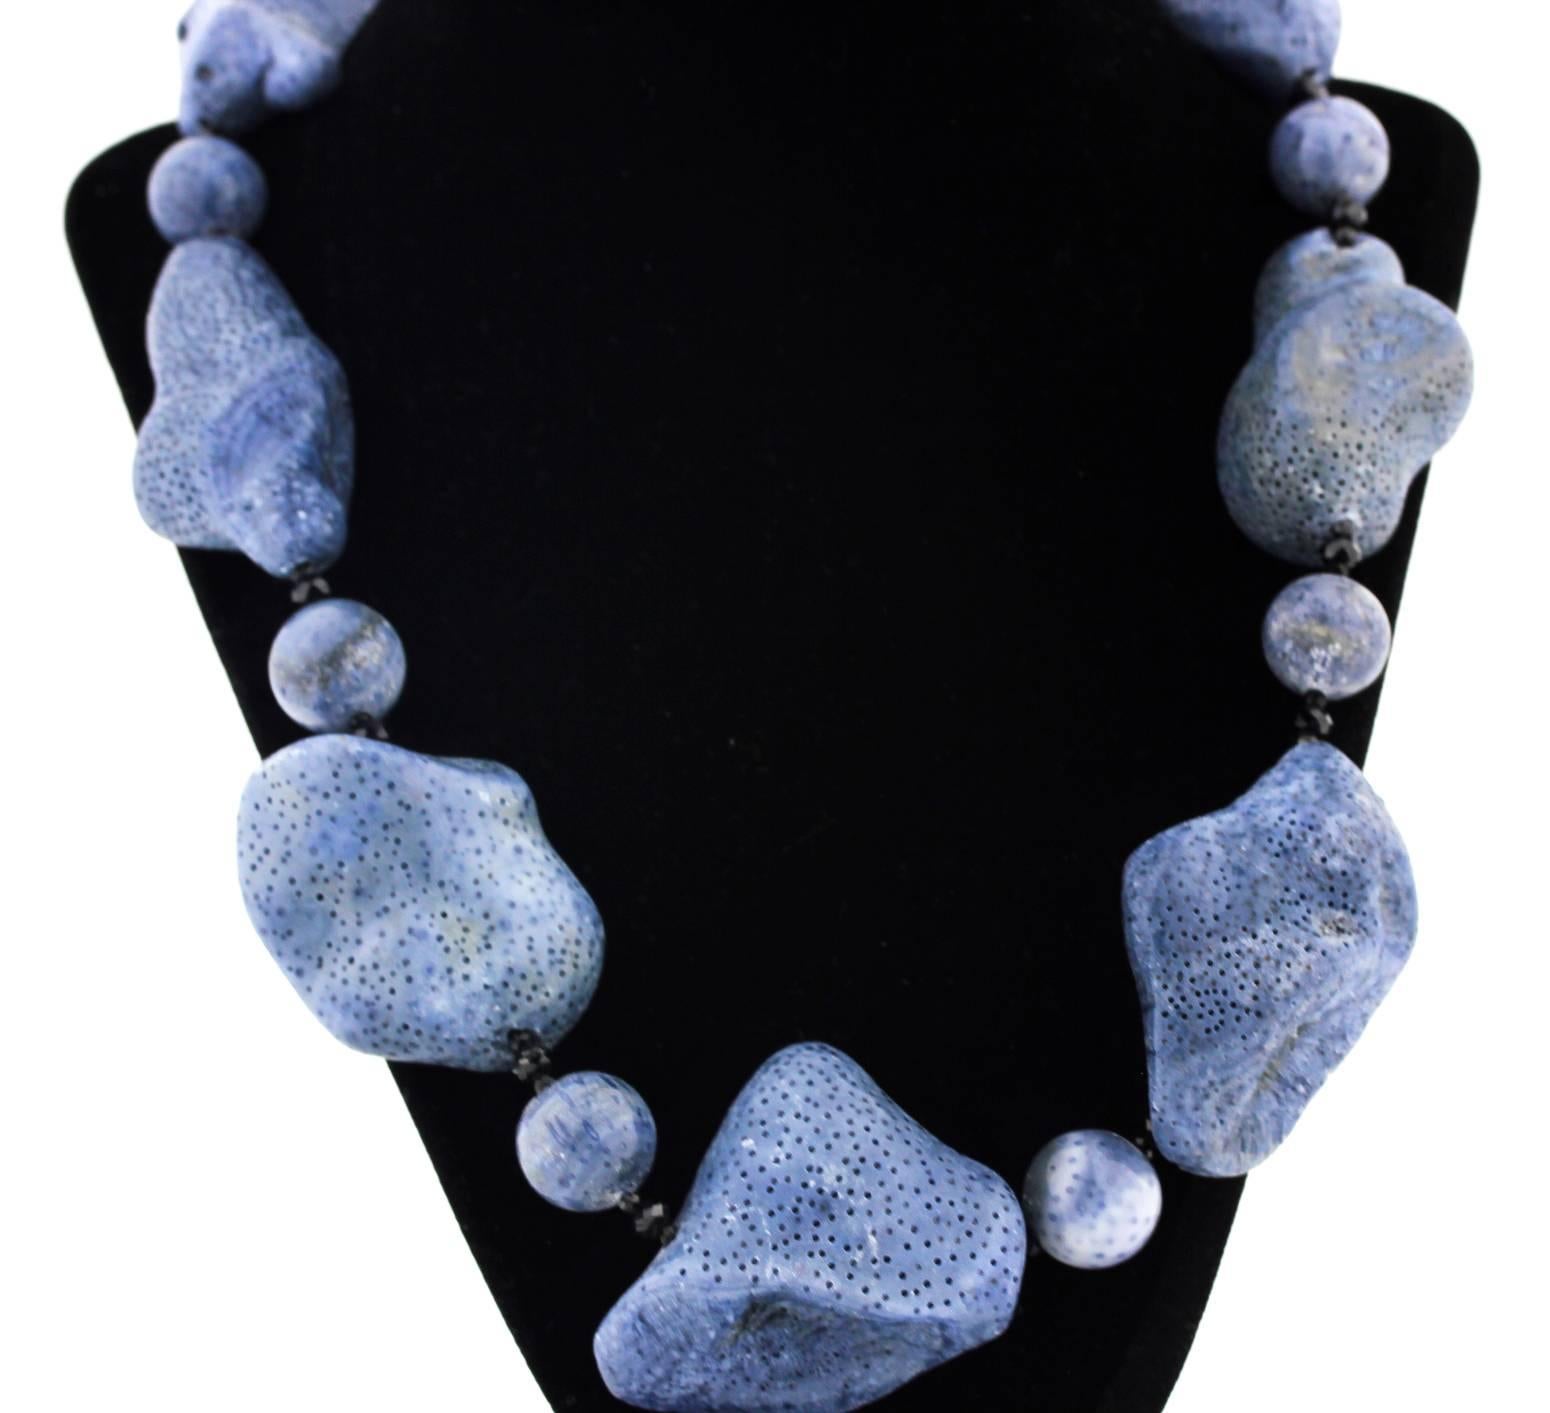 Beautiful blue natural Coral enhanced with sparkling black Spinel
Size:  largest Coral 46 mm x 41 mm
Length:  22.5 inches
Clasp:  Diamonds set in Sterling Silver